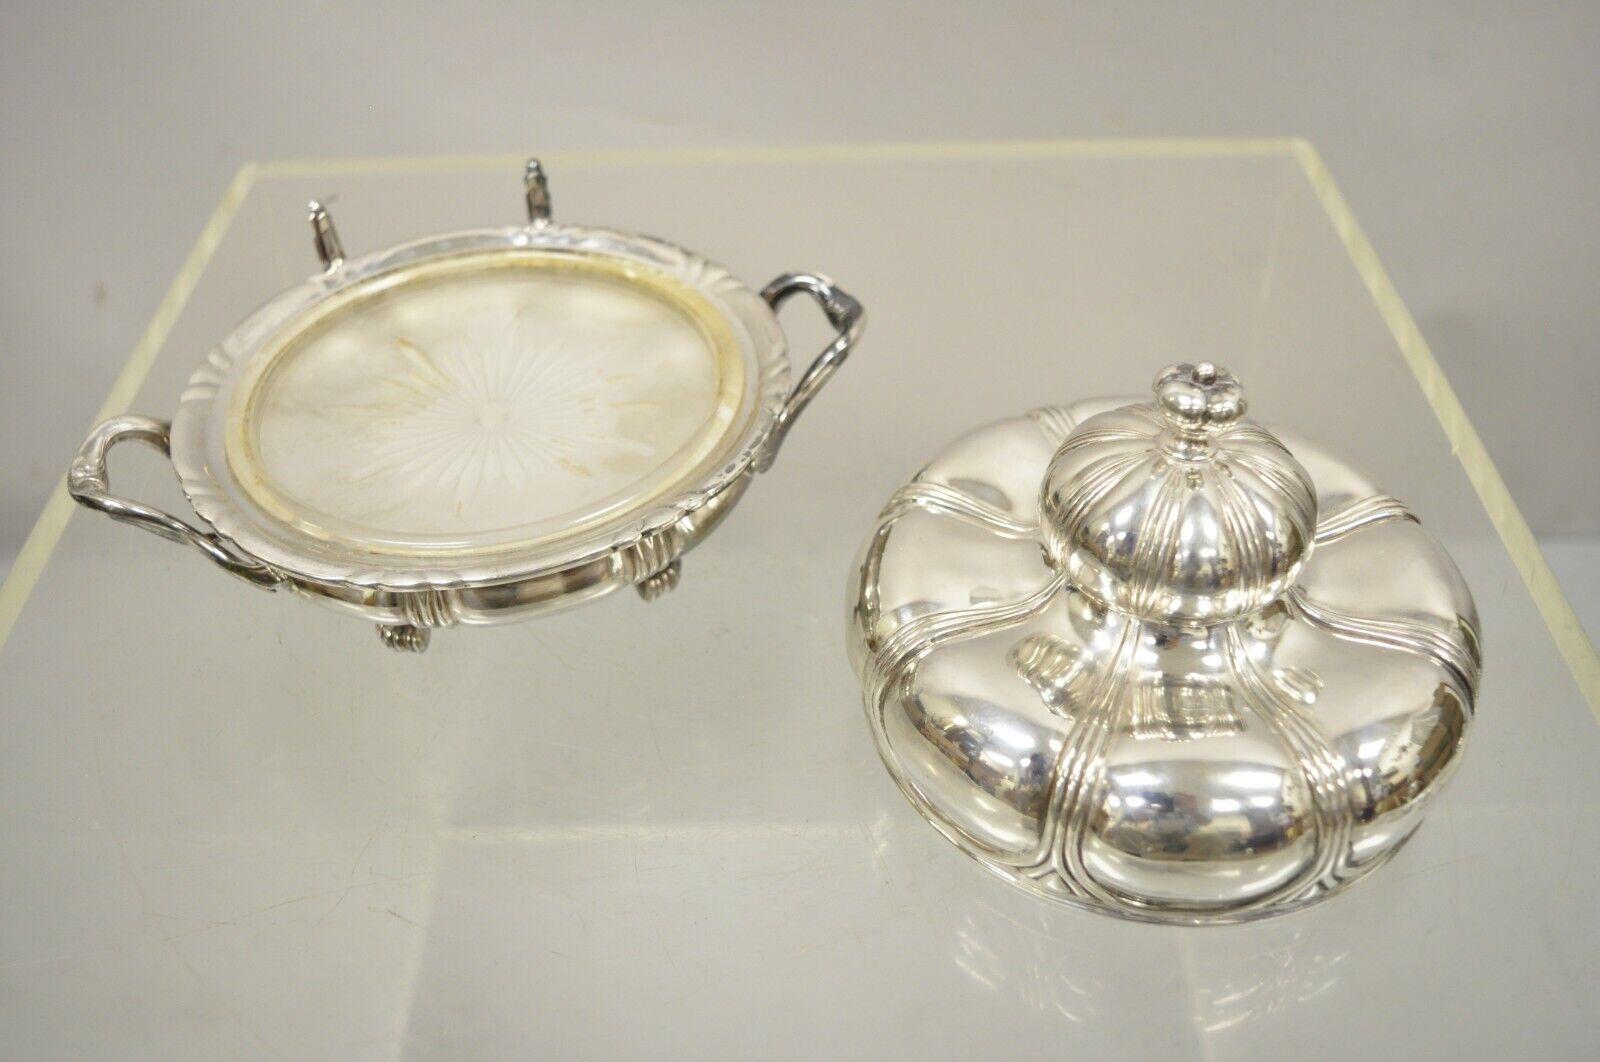 Vintage Pairpoint Silver Plated Covered Butter Bowl Covered Dish with Glass 6